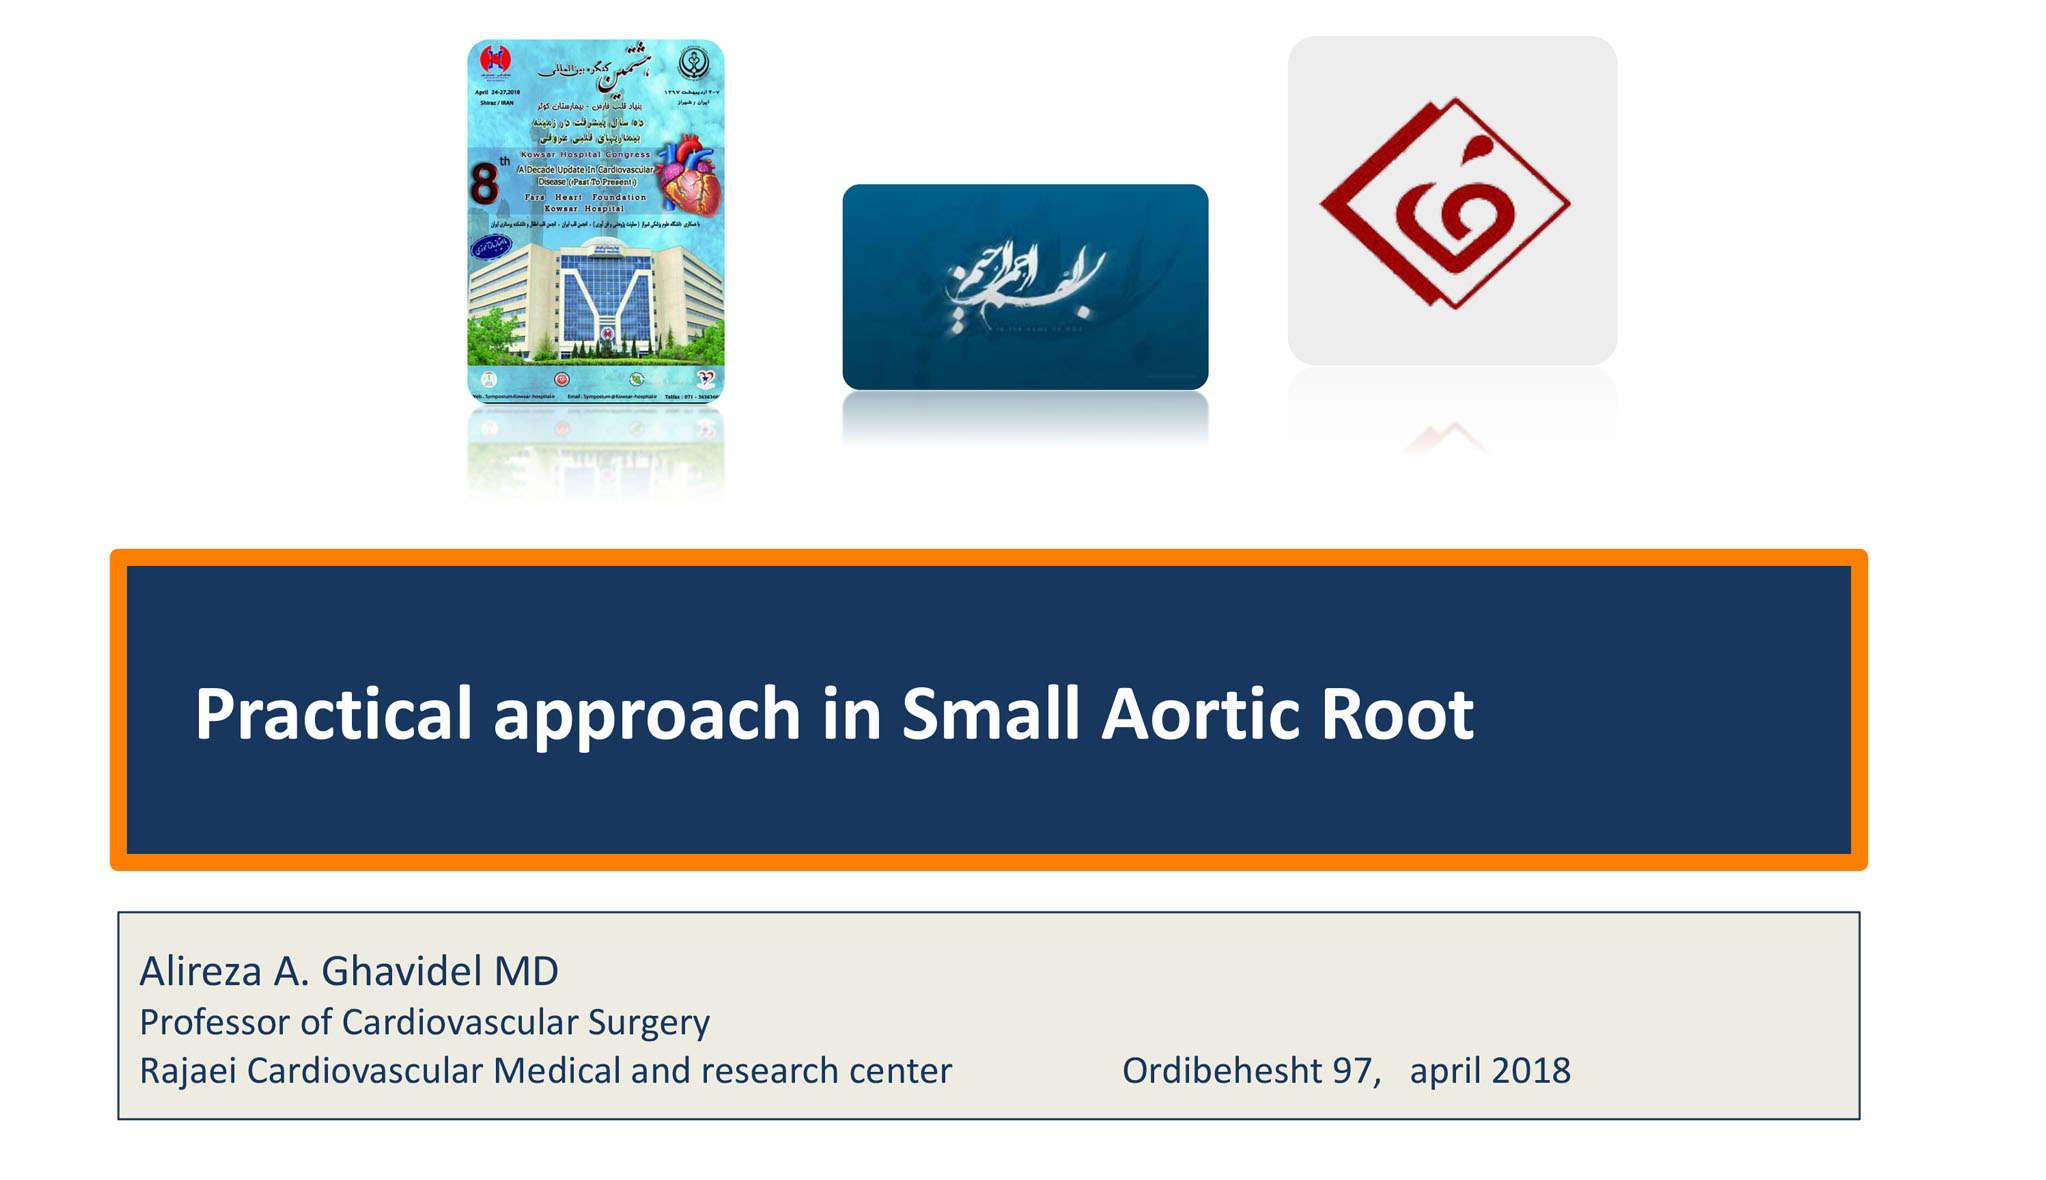 Practical approach in Small Aortic Root